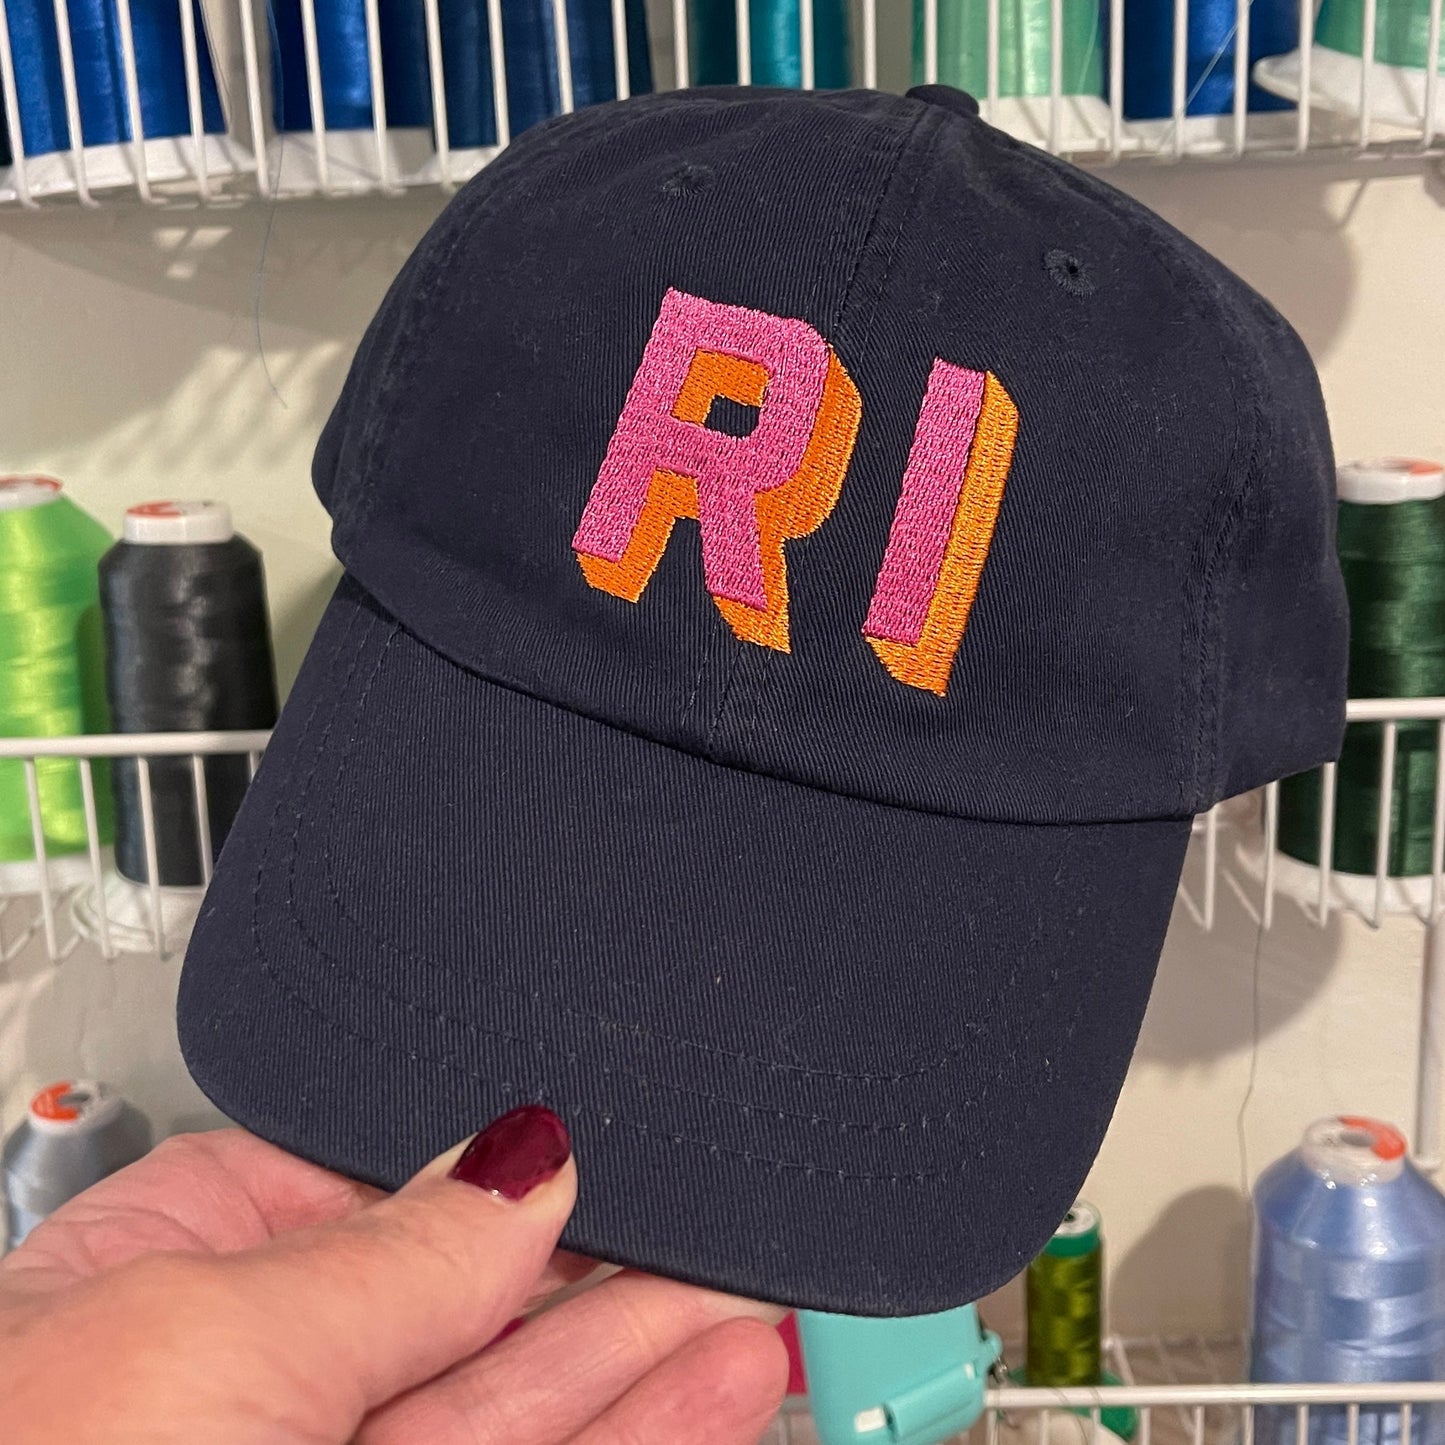 White Dad Hat - Aqua & Coral Shadow Block Lettering